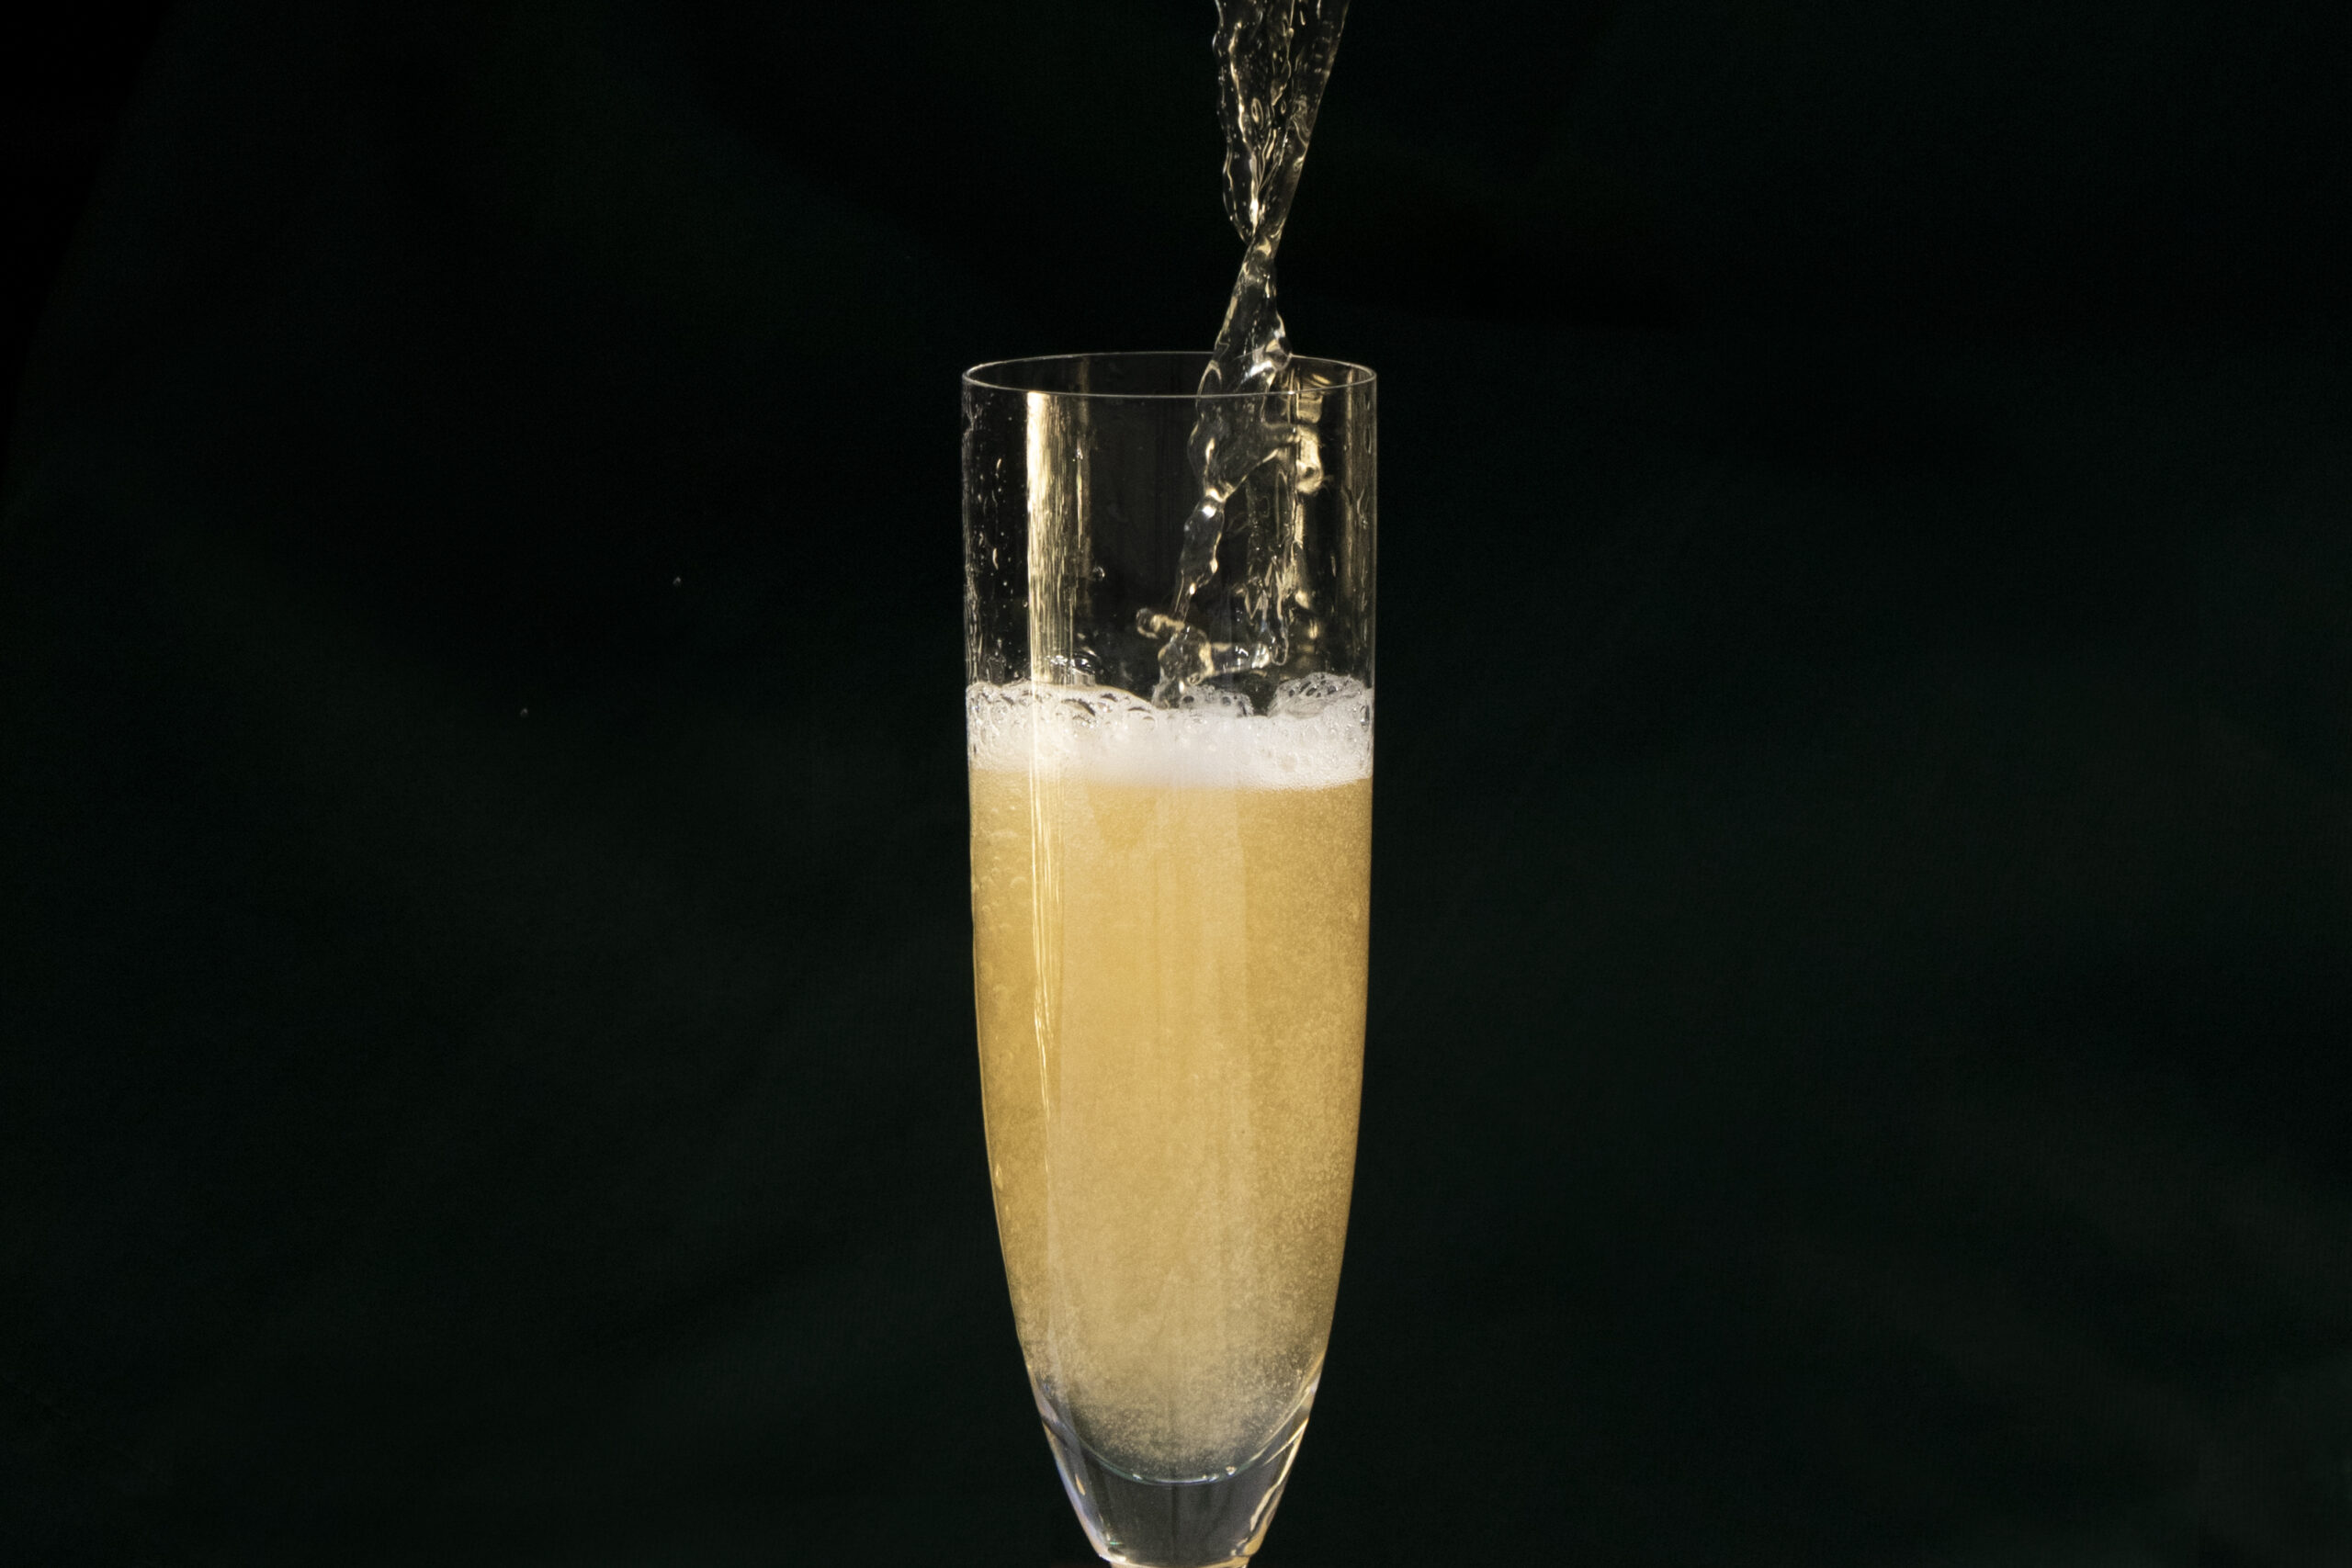 A champagne flute being filled with frothing yellow-ish palm wine.